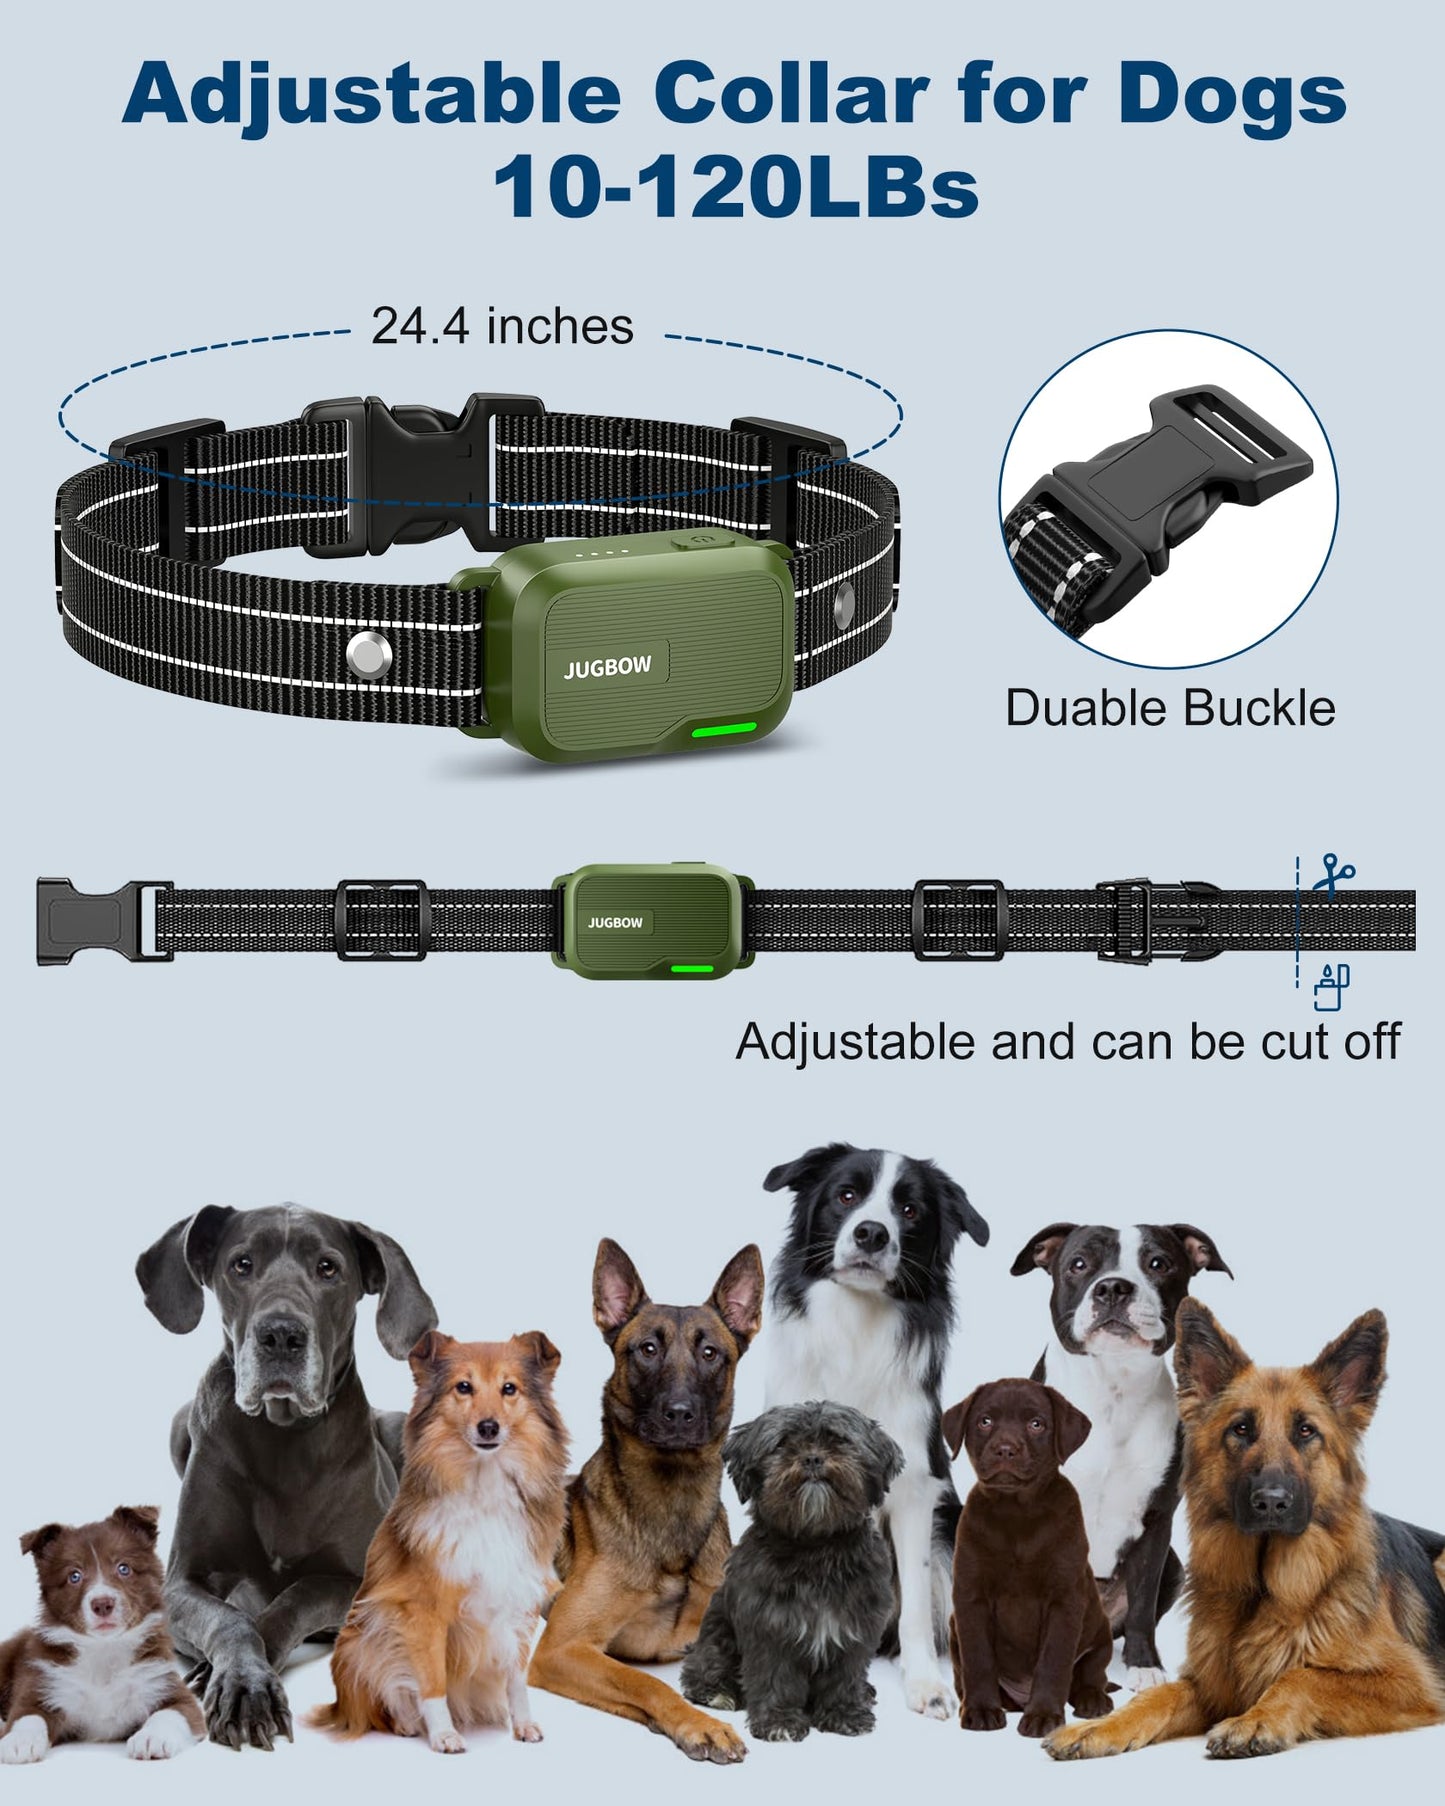 Jugbow Dog Shock Collar - 3300FT Dog Training Collar with Remote Innovative IPX7 Waterproof with 4 Training Modes, Rechargeable E-Collar for All Breeds